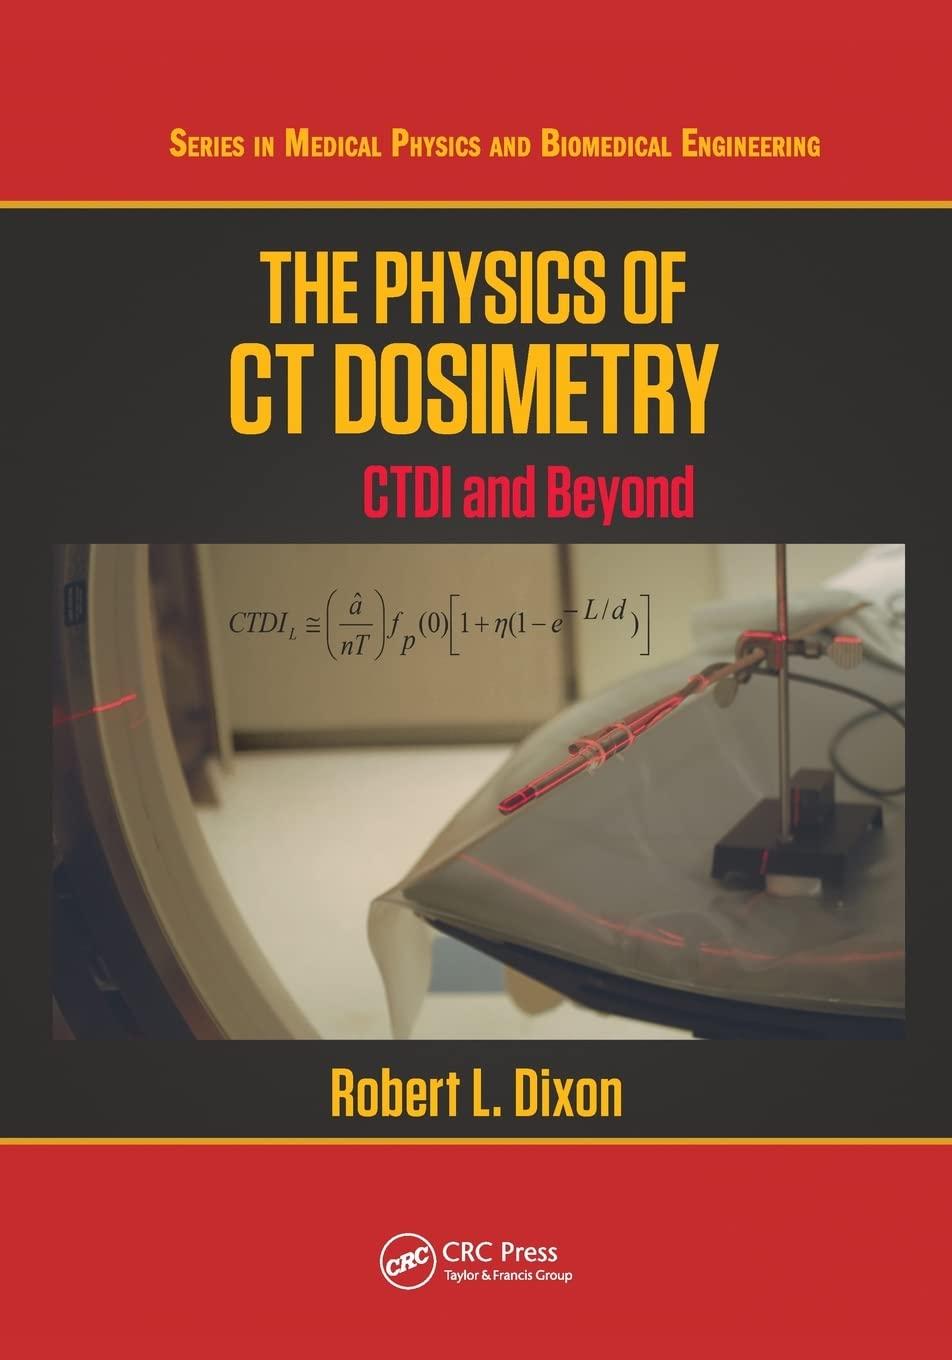 the physics of ct dosimetry series in medical physics and biomedical engineering 1st edition robert l. dixon